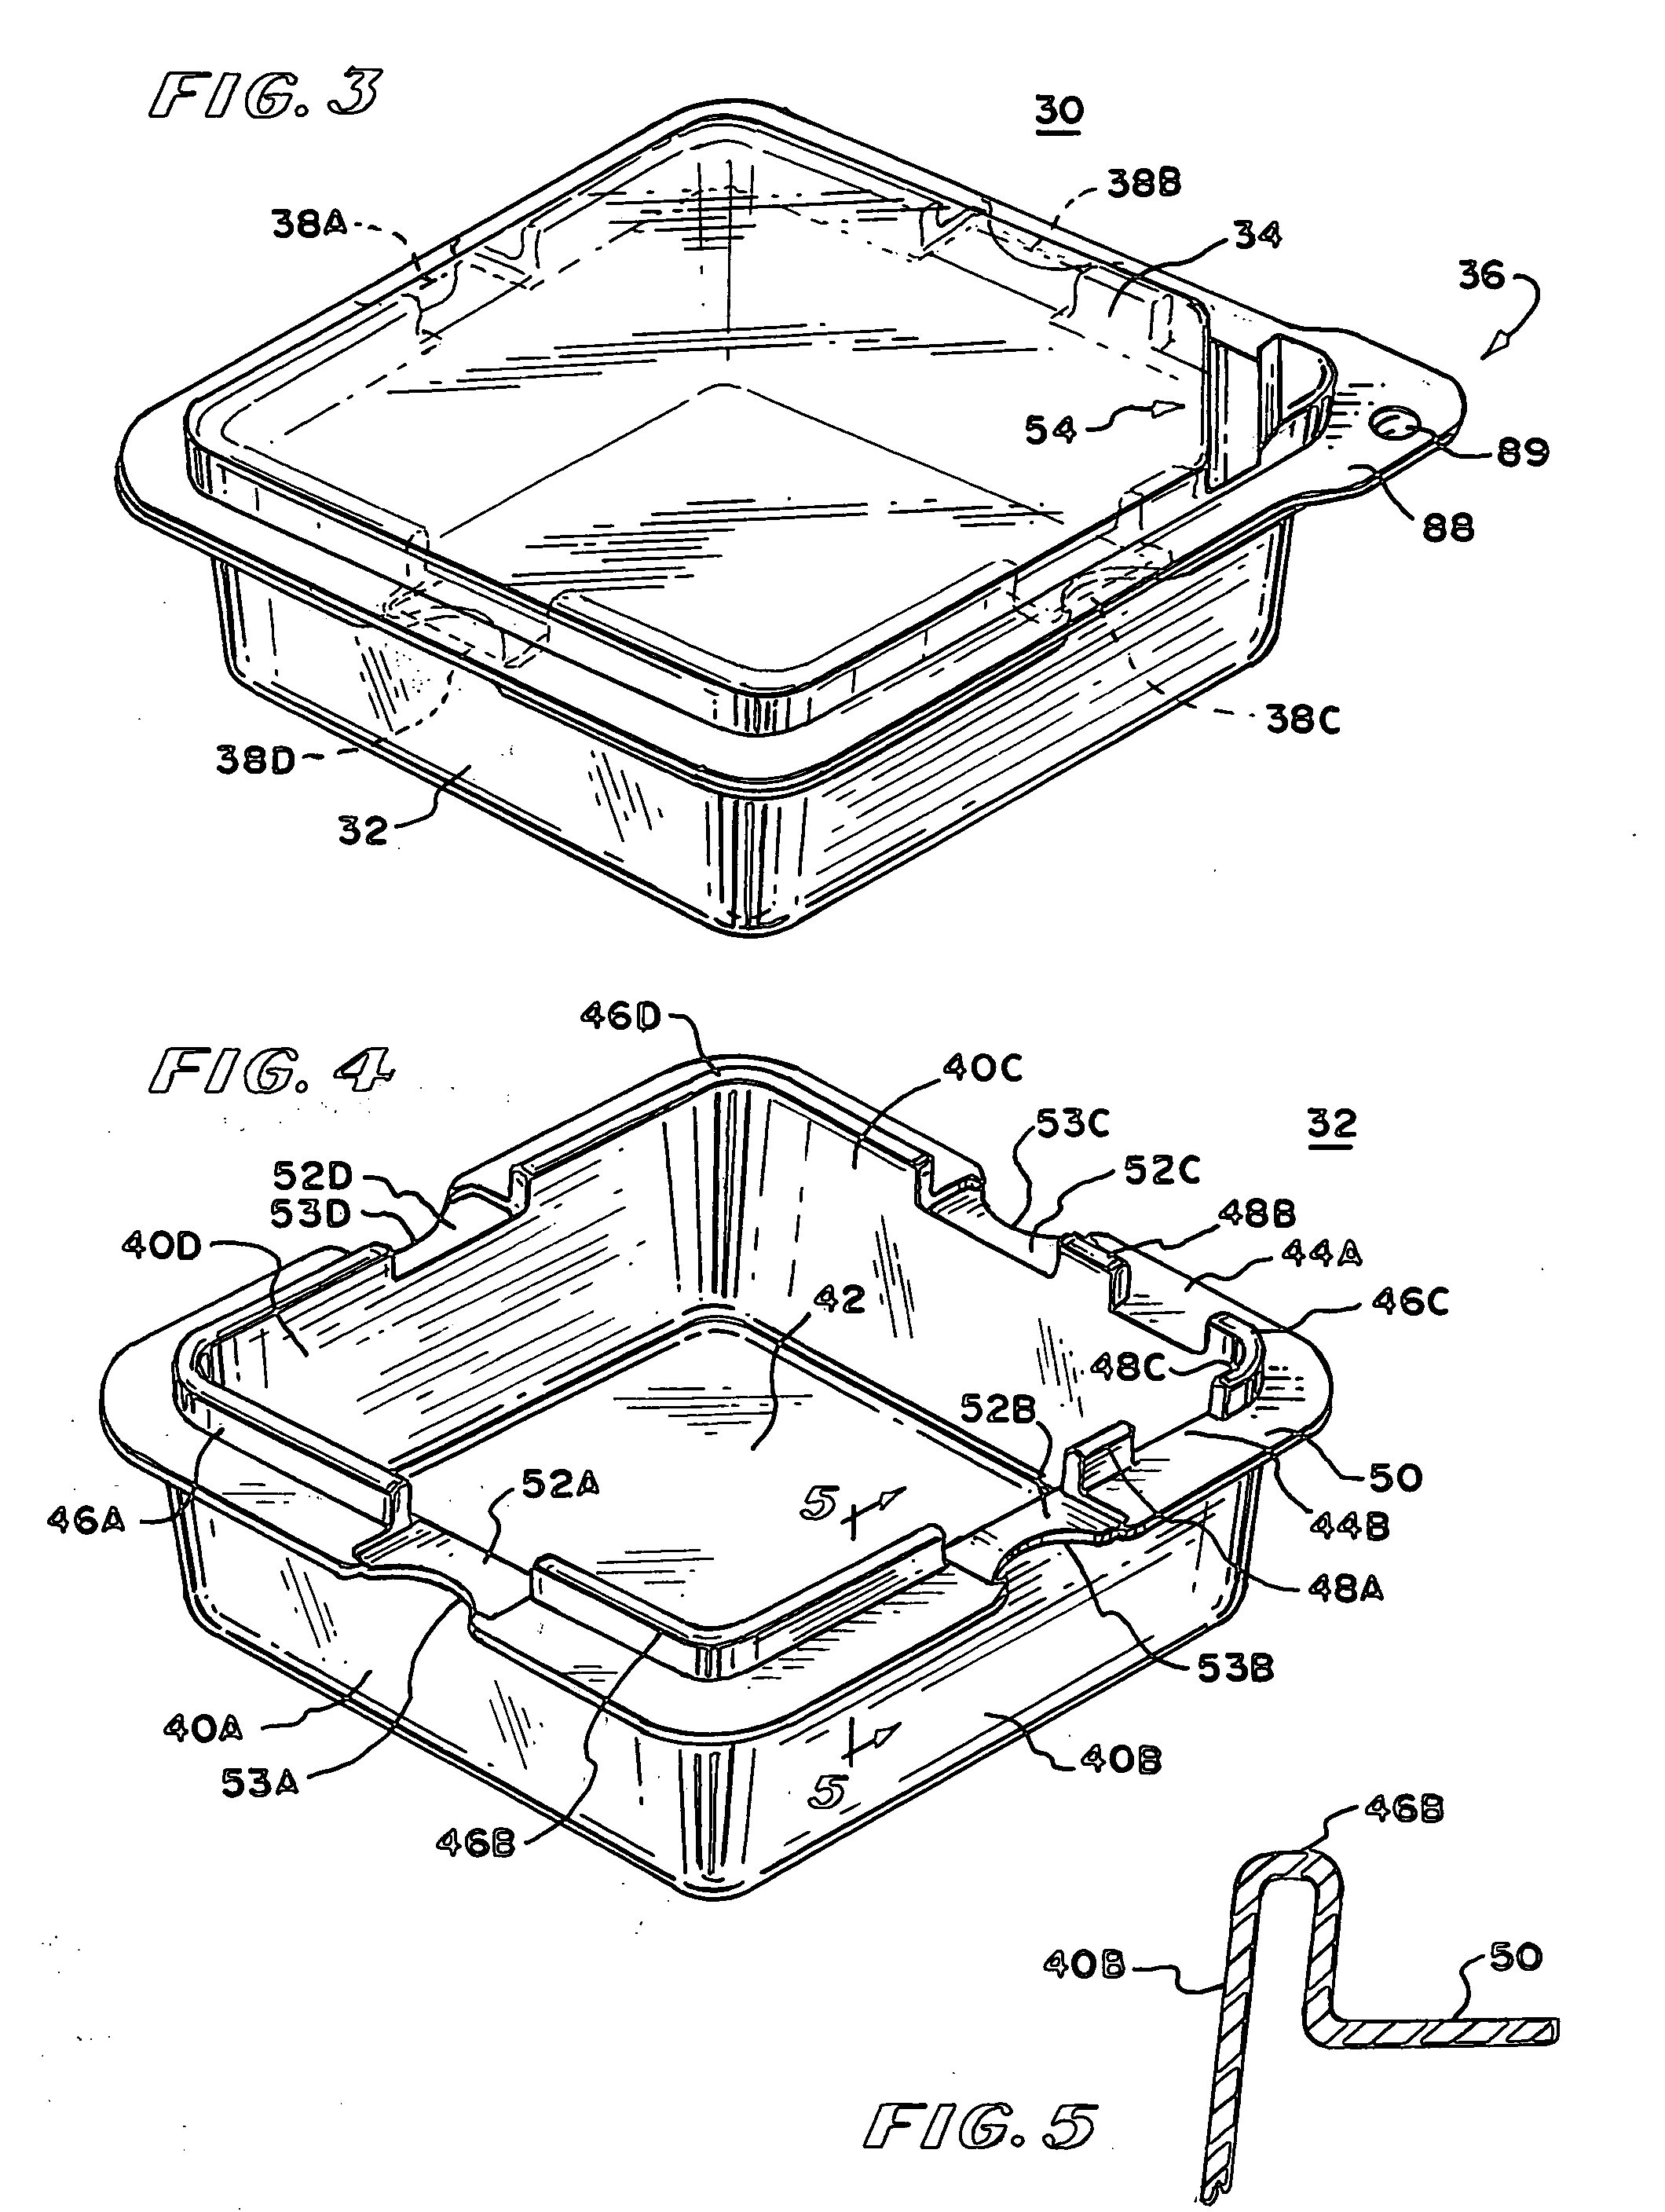 Seed testing method and apparatus